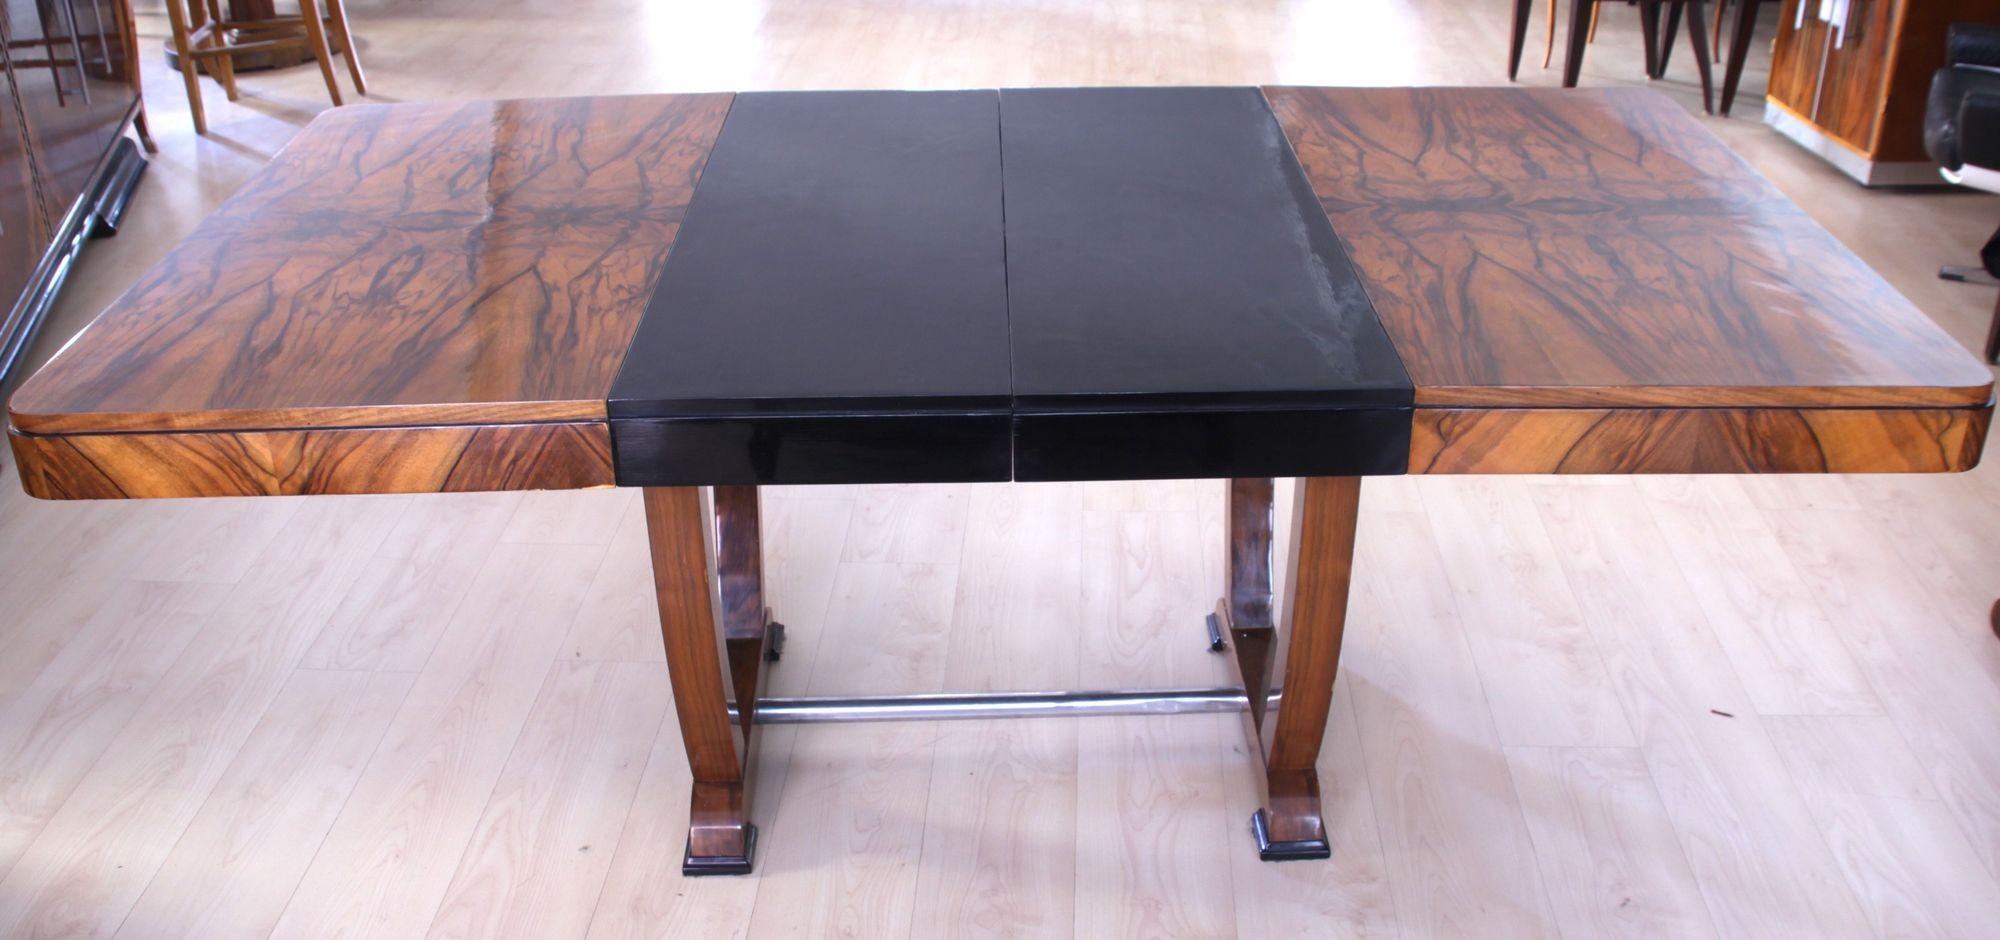 Expandable Art Deco Dining Table, Walnut Veneer, Chrome, France, circa 1930 In Good Condition For Sale In Regensburg, DE